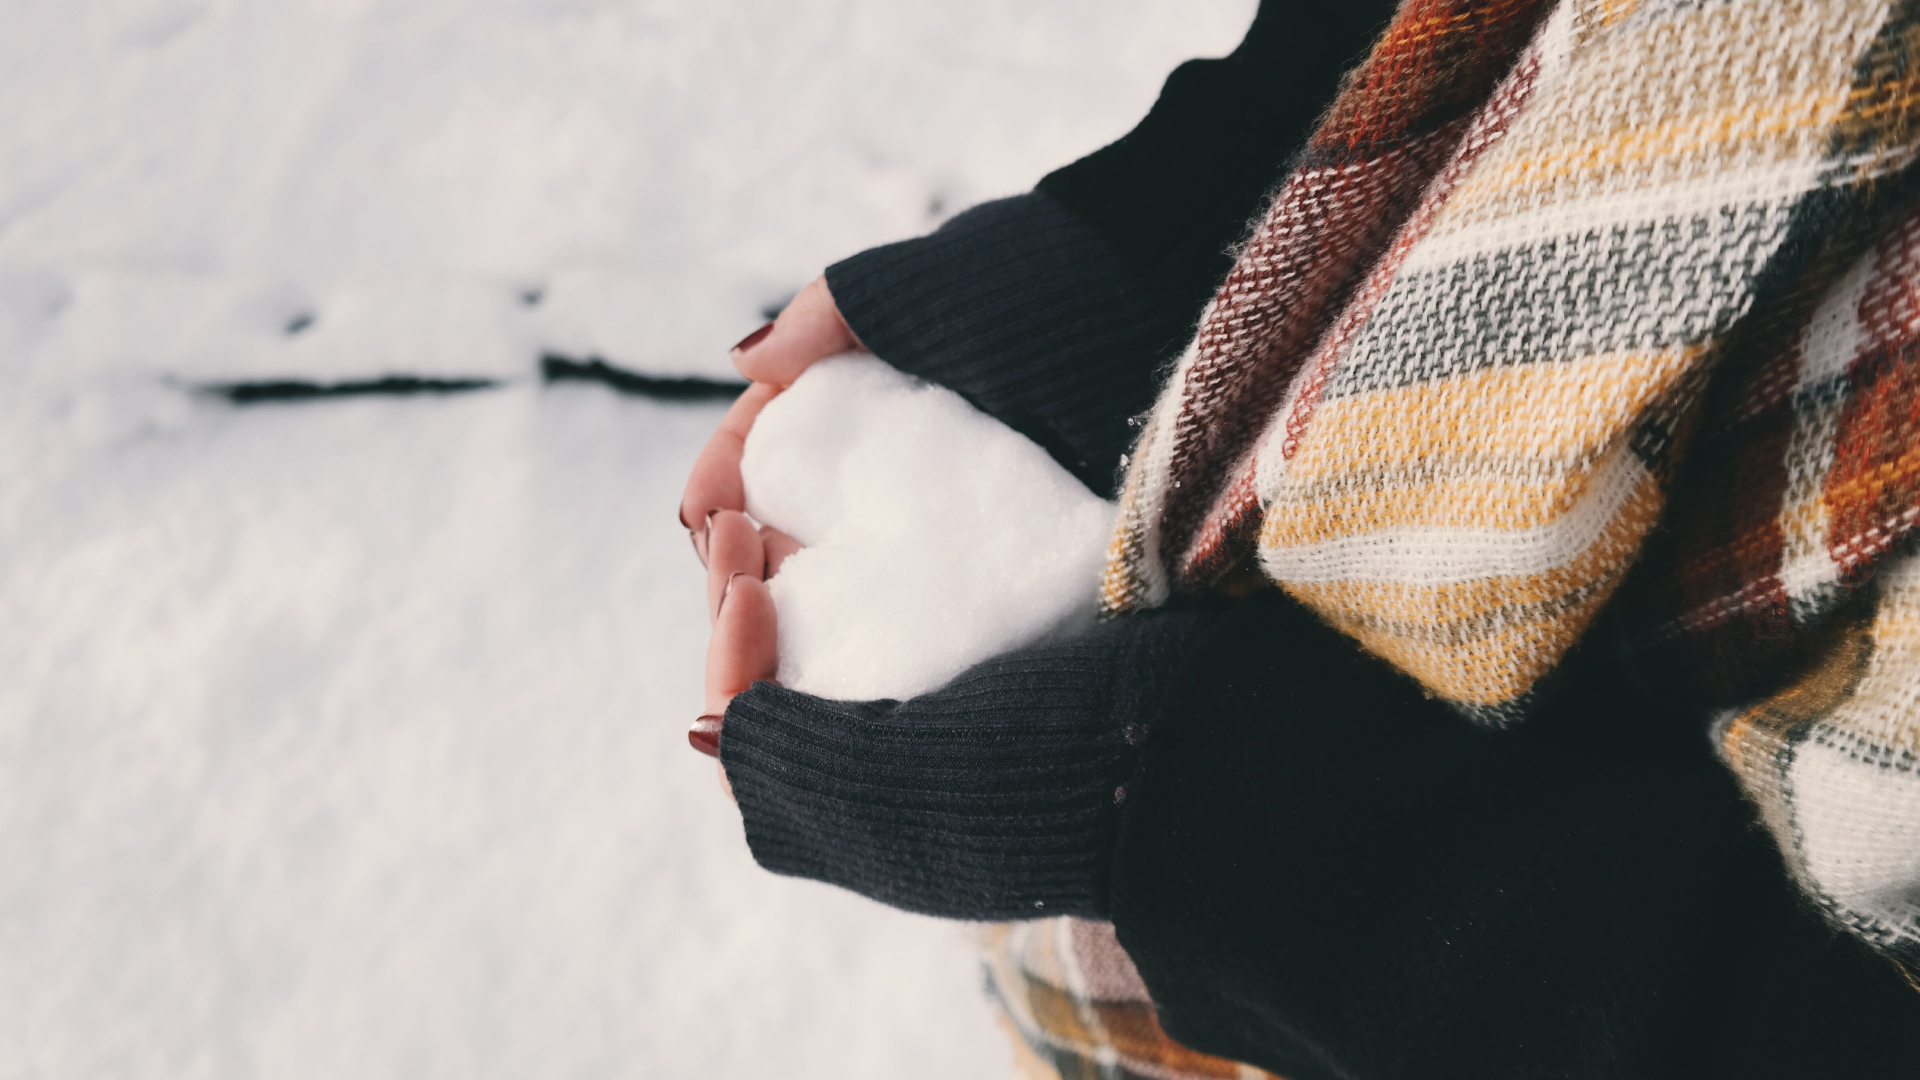 A person wearing a scarf holds a snowball shaped like a heart.